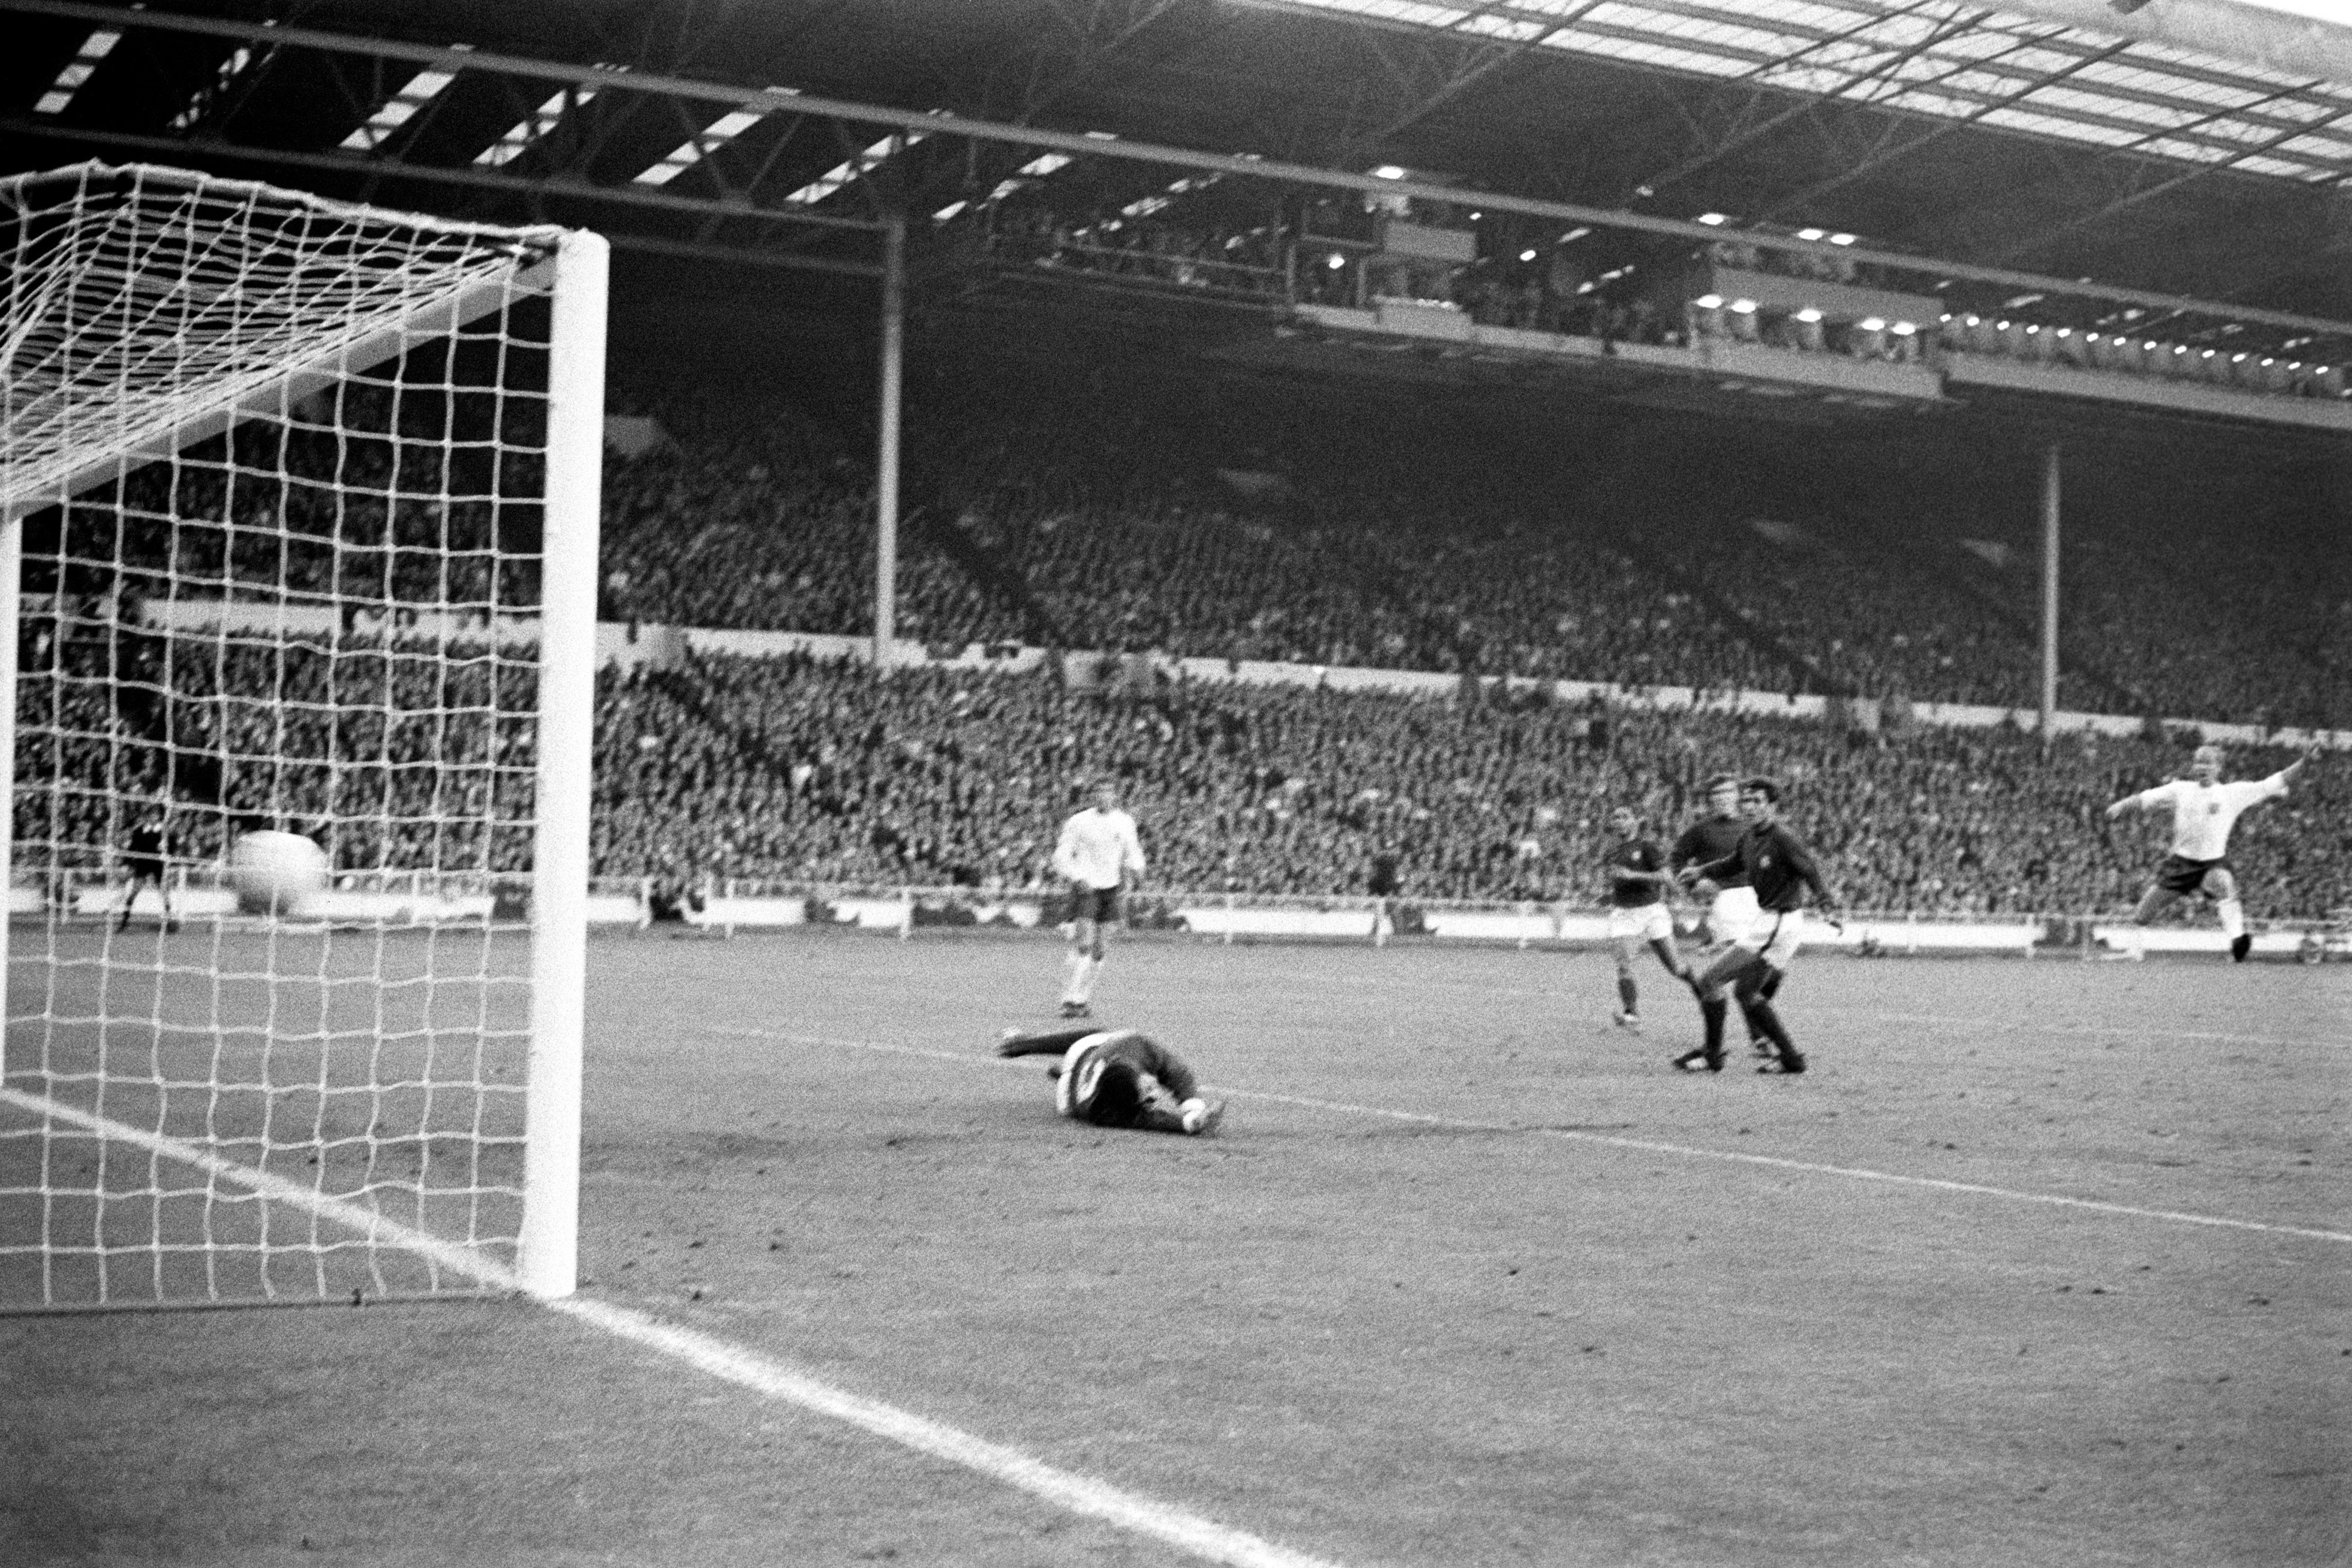 Charlton (right) scores against Portugal in the 1966 World Cup semi-final